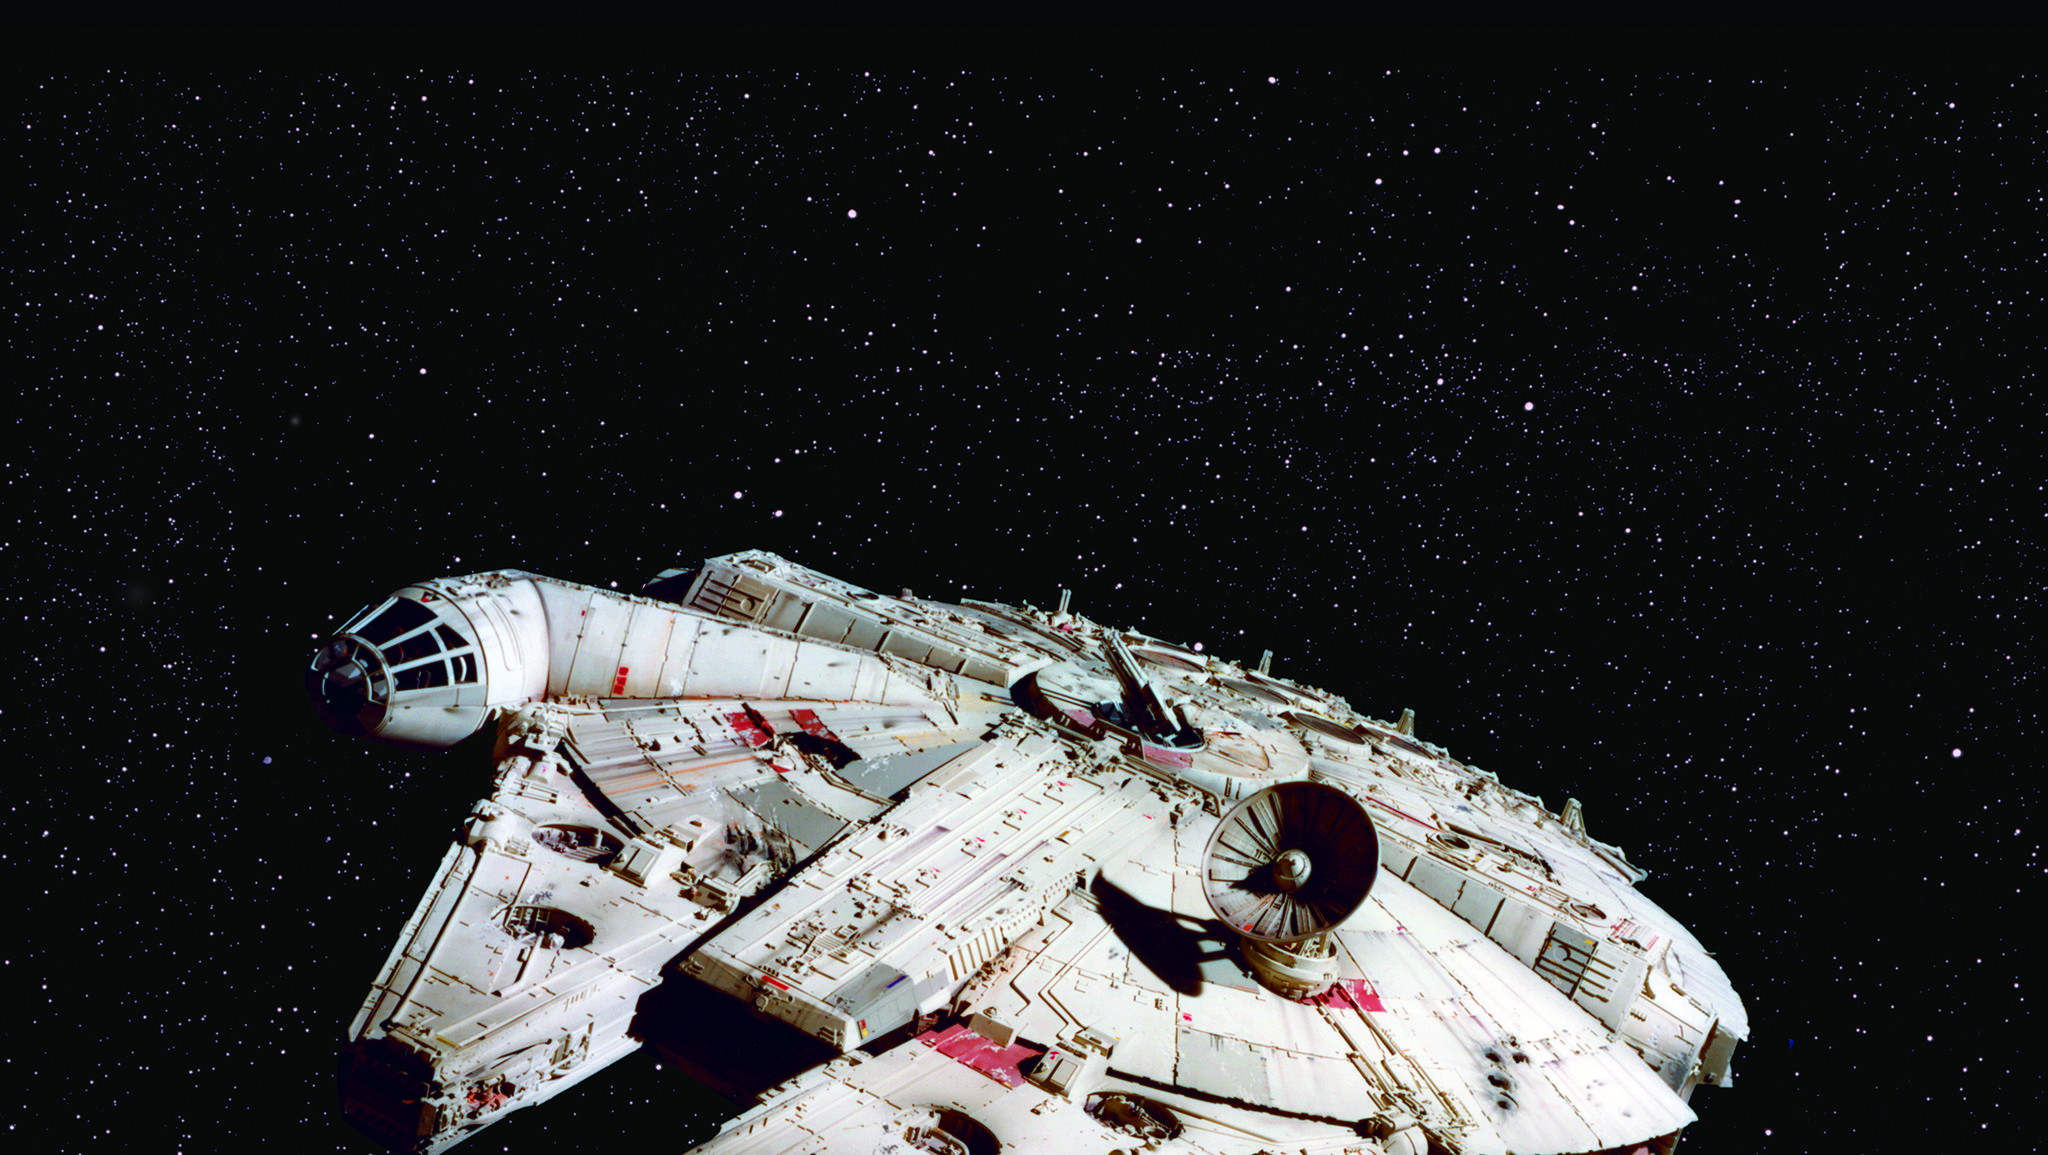 Millennium Falcon News Articles Stories And Trends For Today